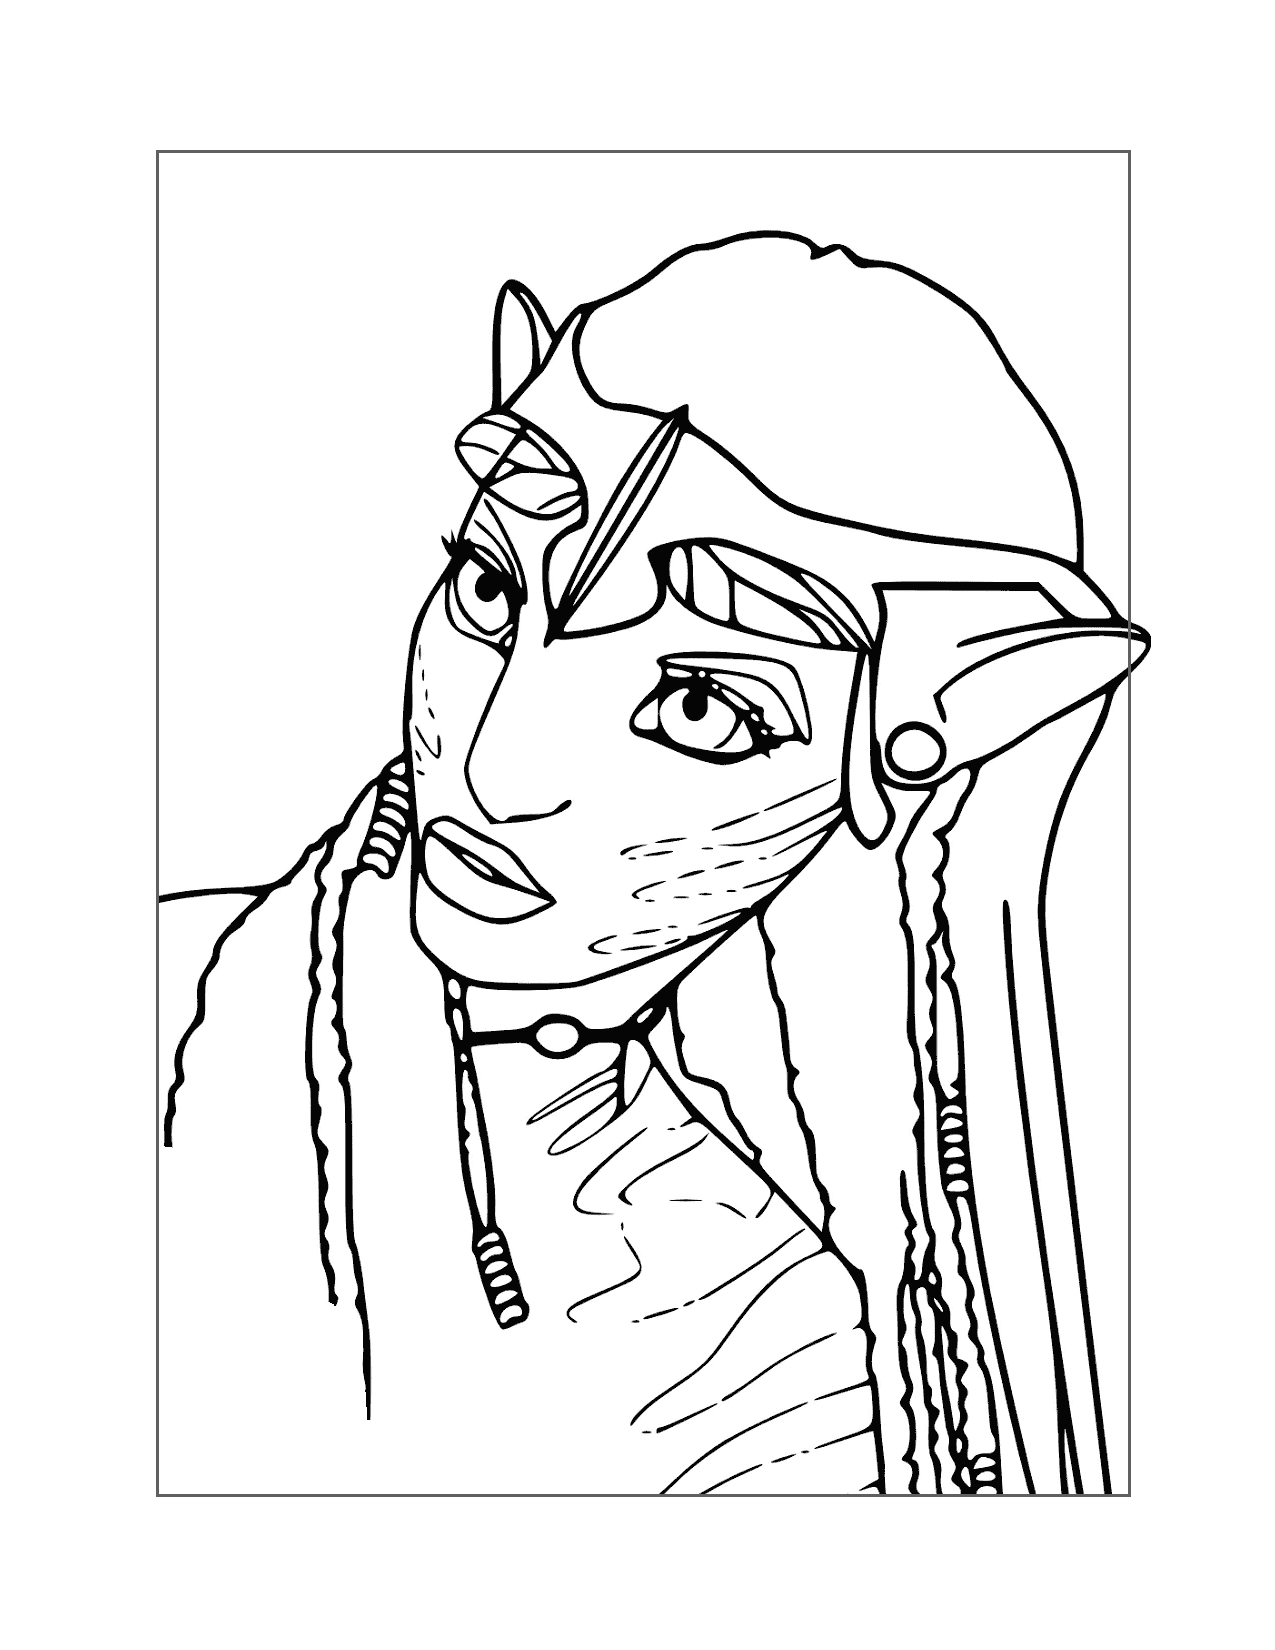 Neytiri Avatar Coloring Pages